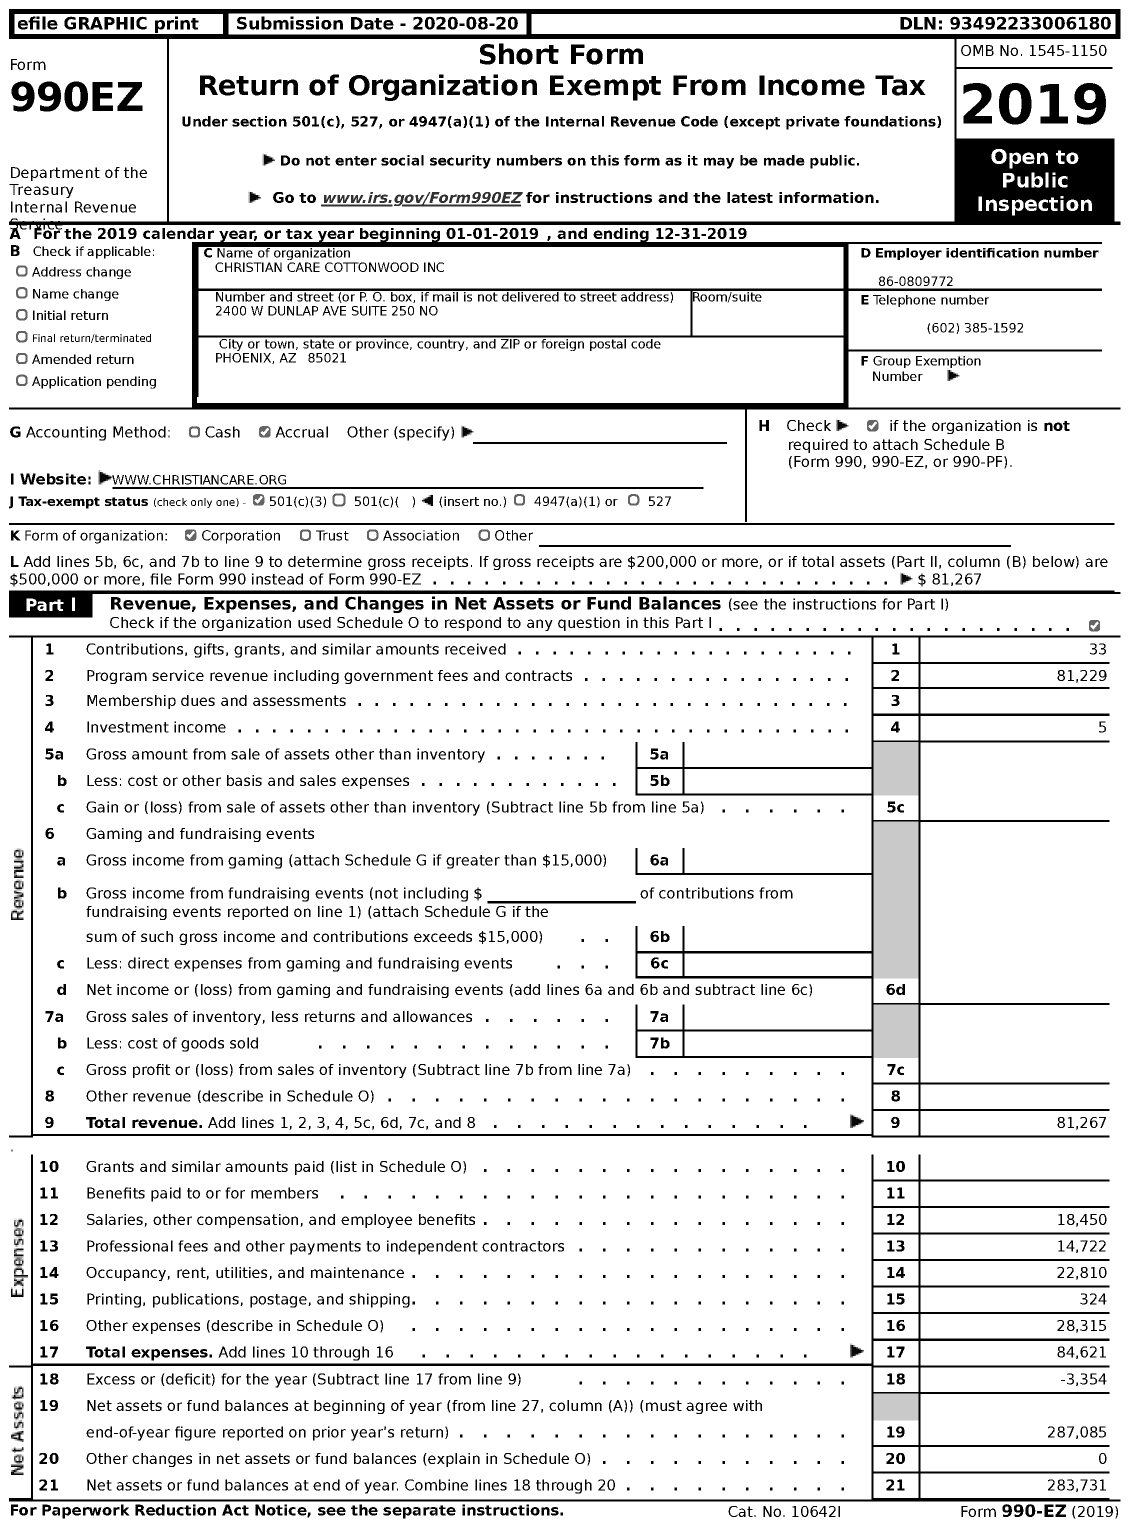 Image of first page of 2019 Form 990EZ for Christian Care Cottonwood